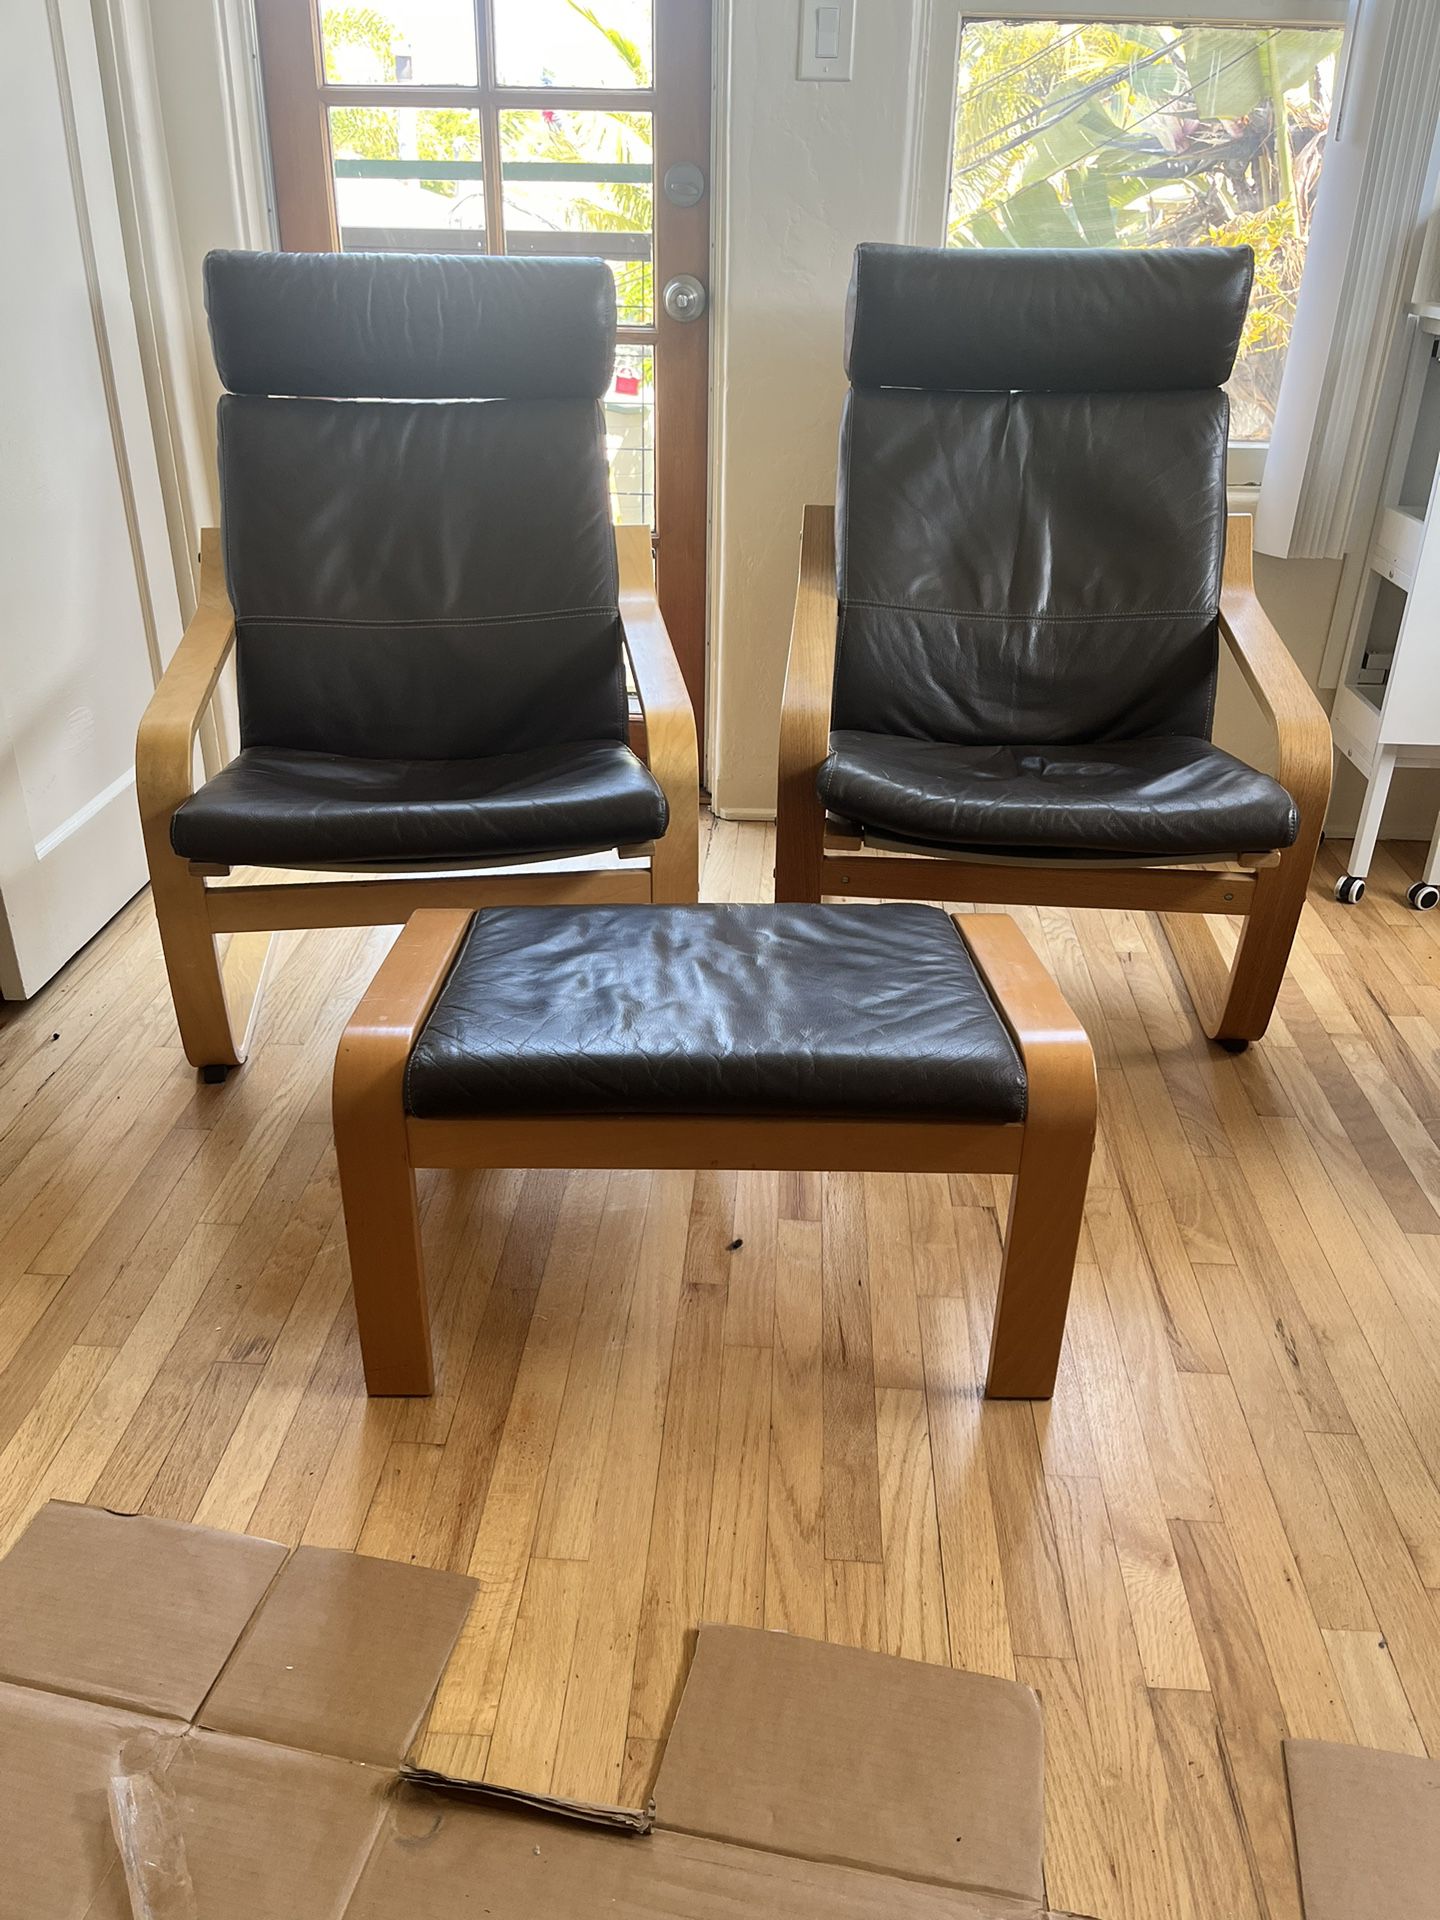 IKEA Poang Leather Chairs And Ottoman 